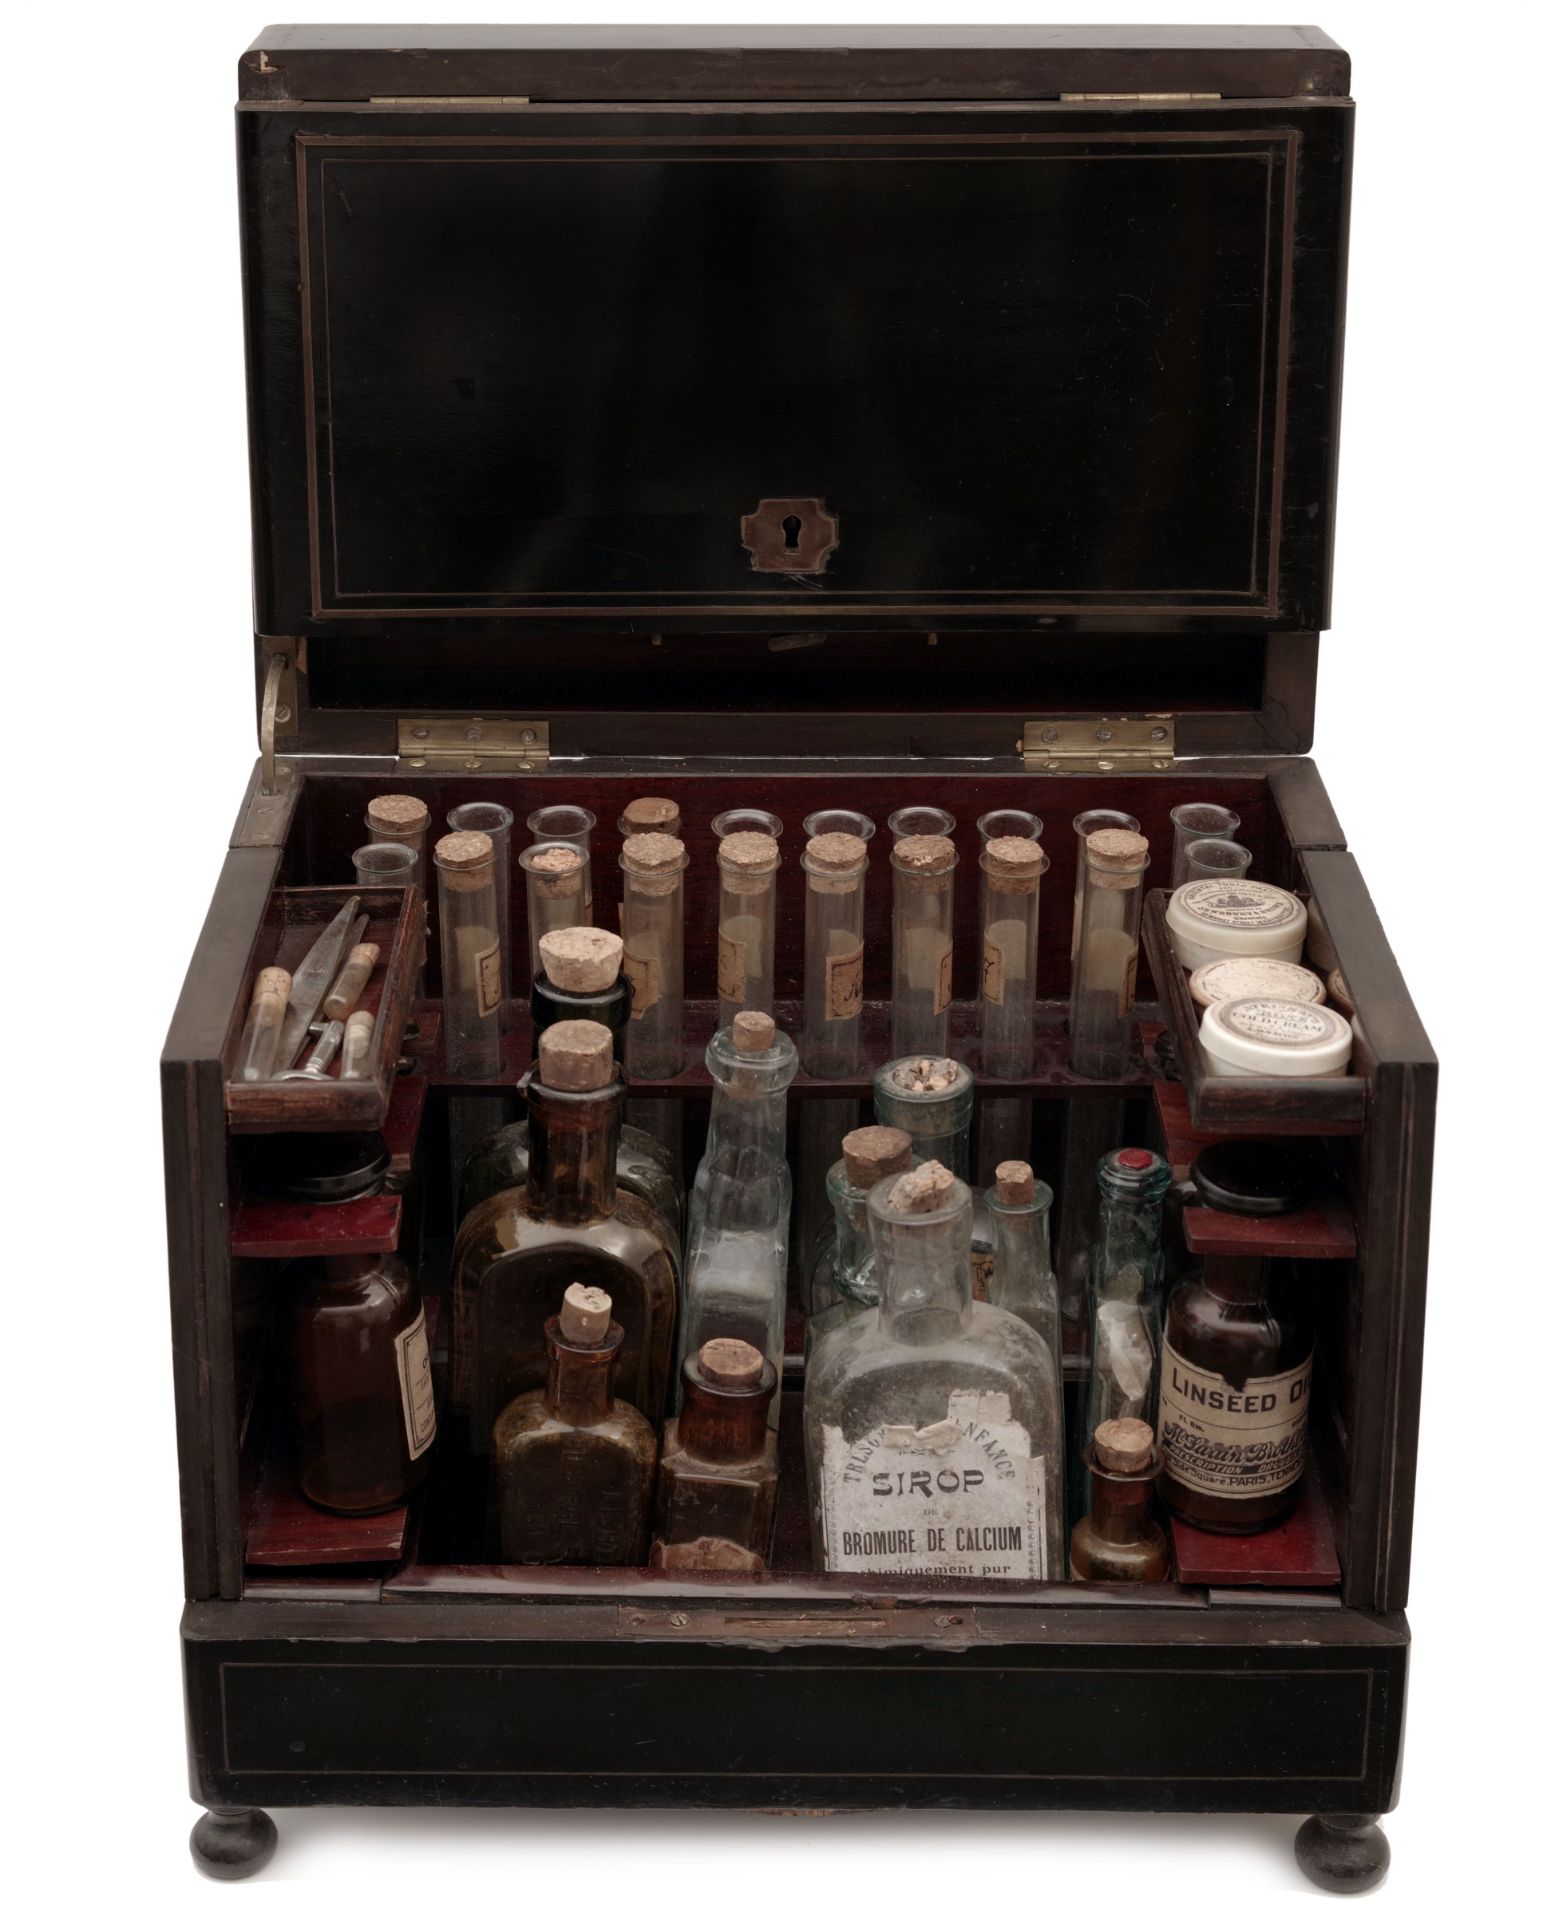 A Traveling Apothecary Chest